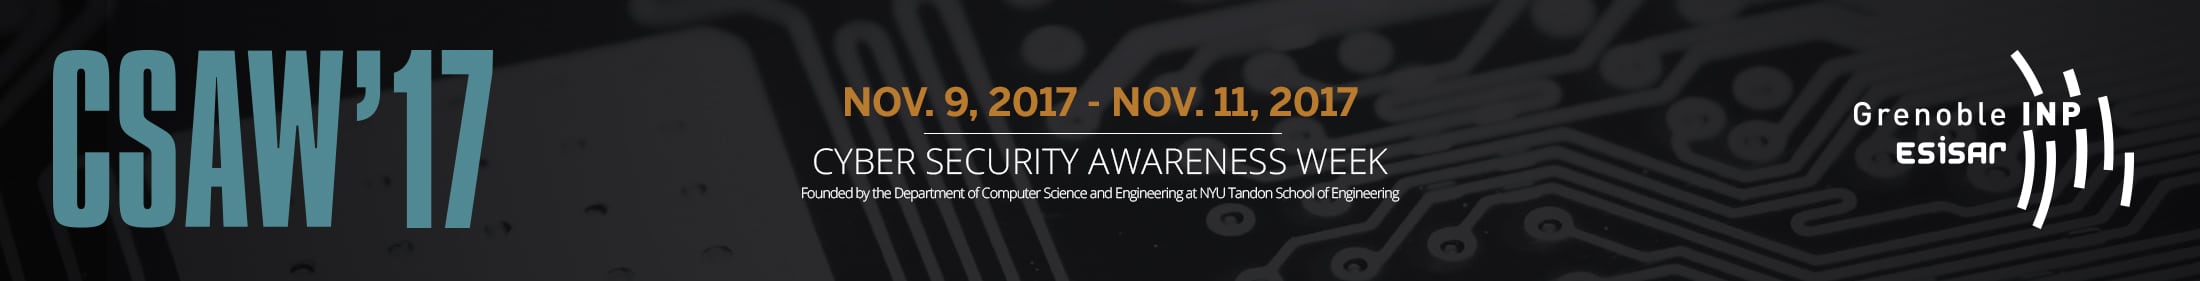 Cyber Security Awareness Week 2017 à Grenoble